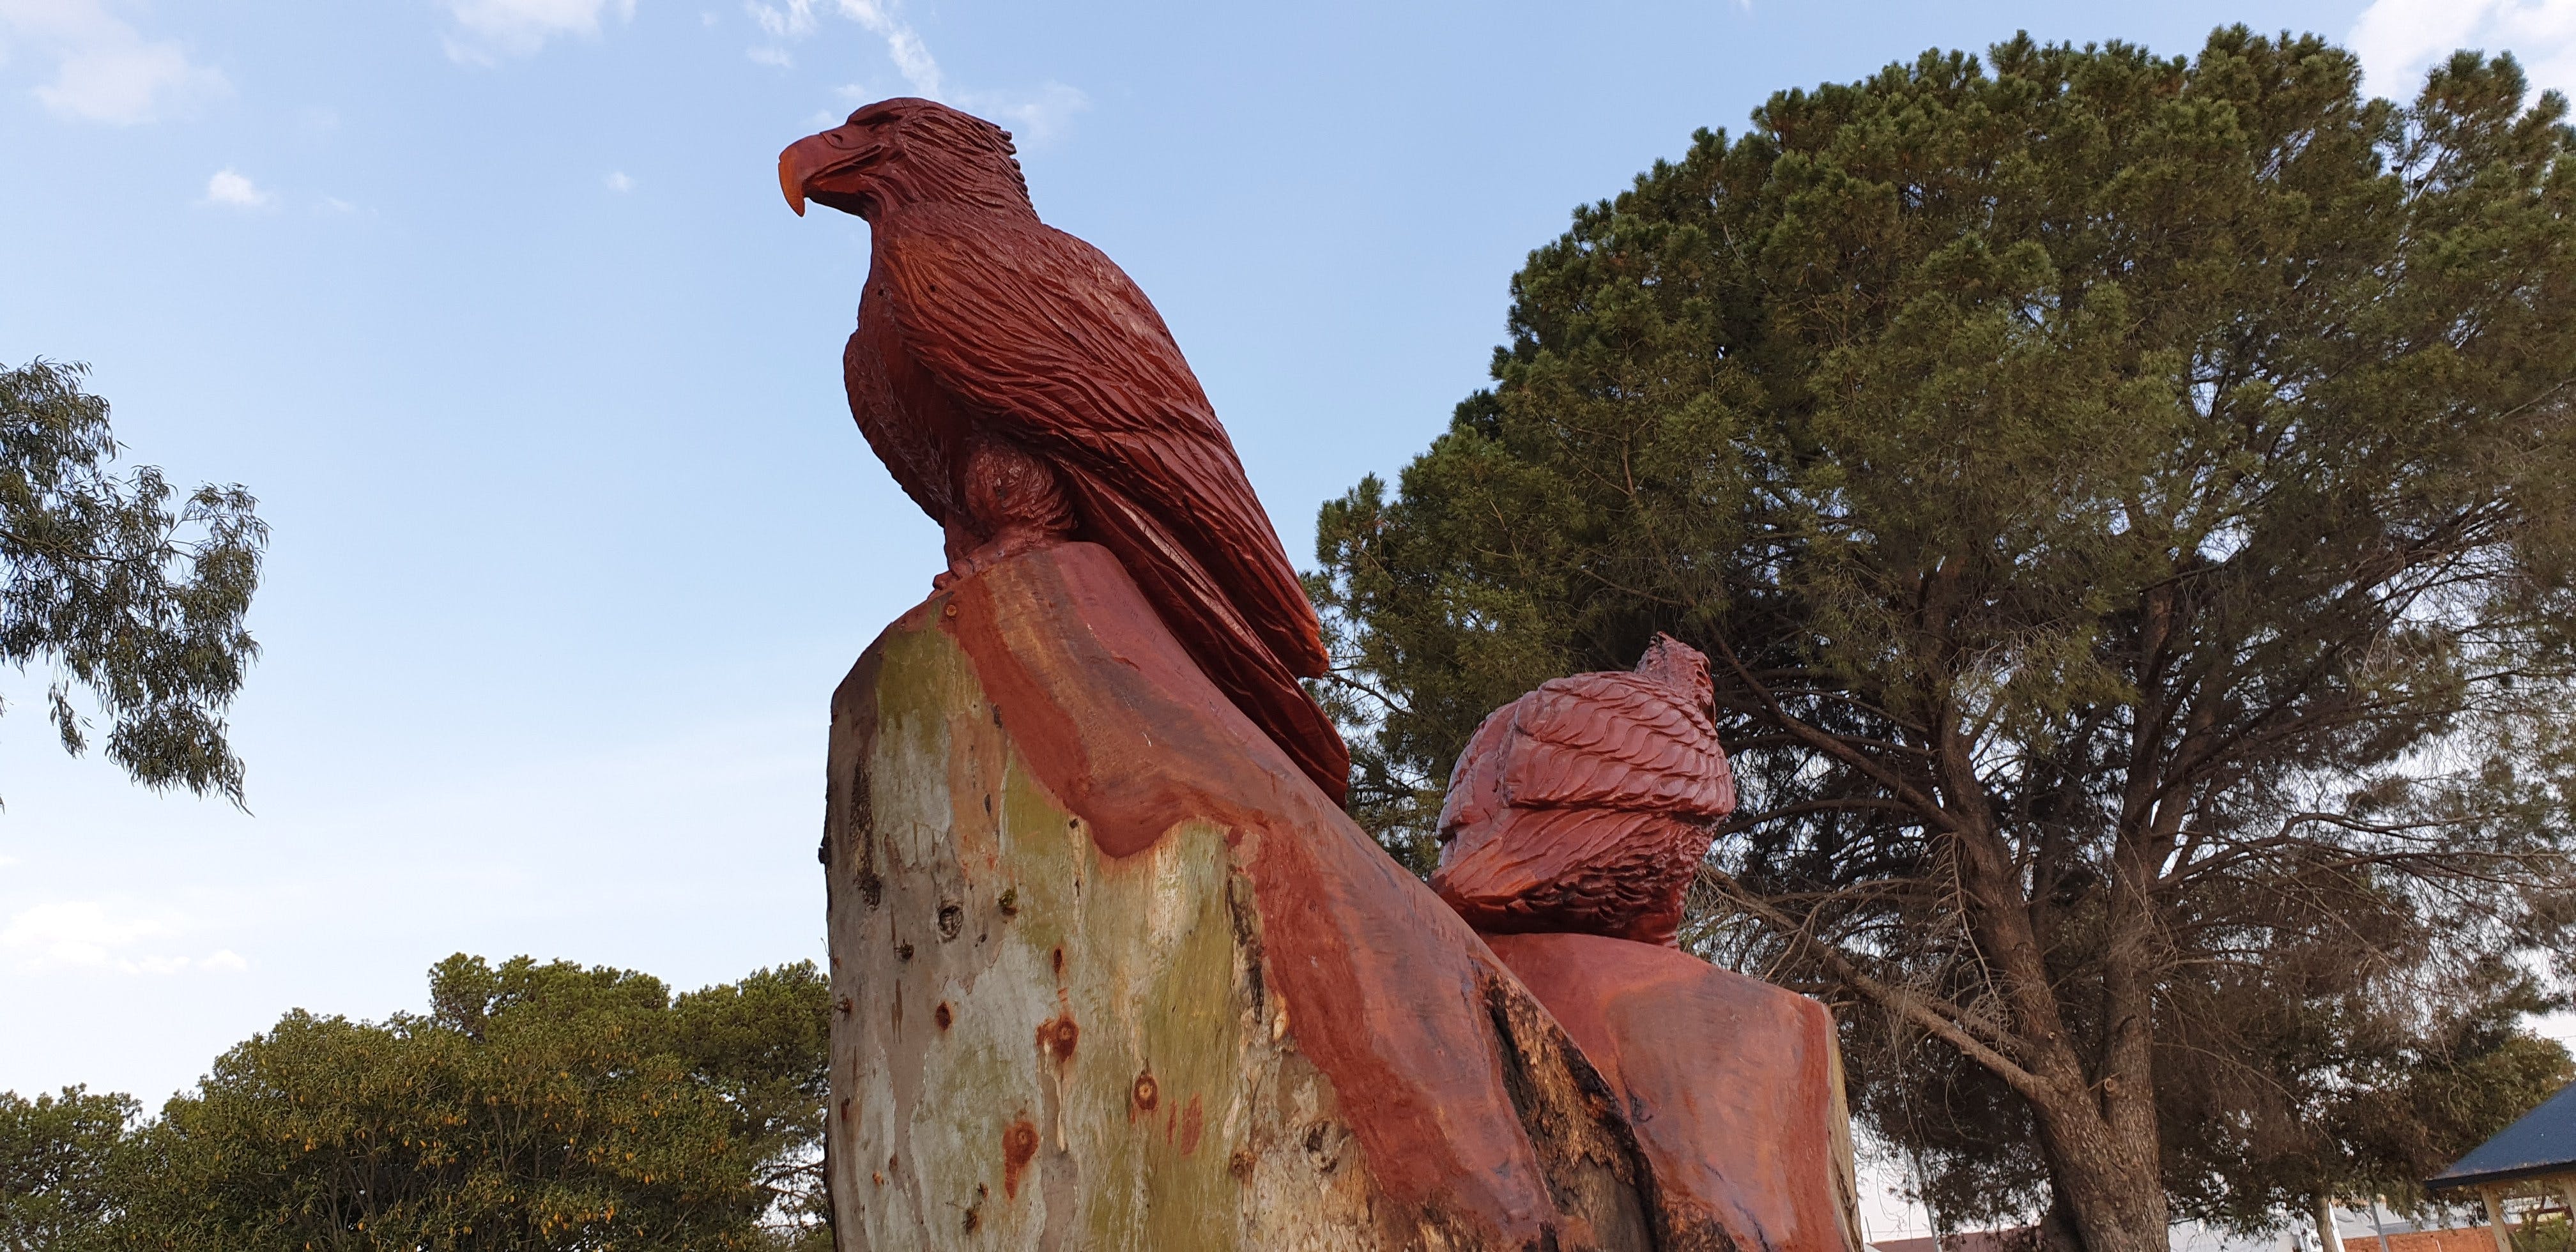 Chainsaw Tree Sculpture - Accommodation VIC